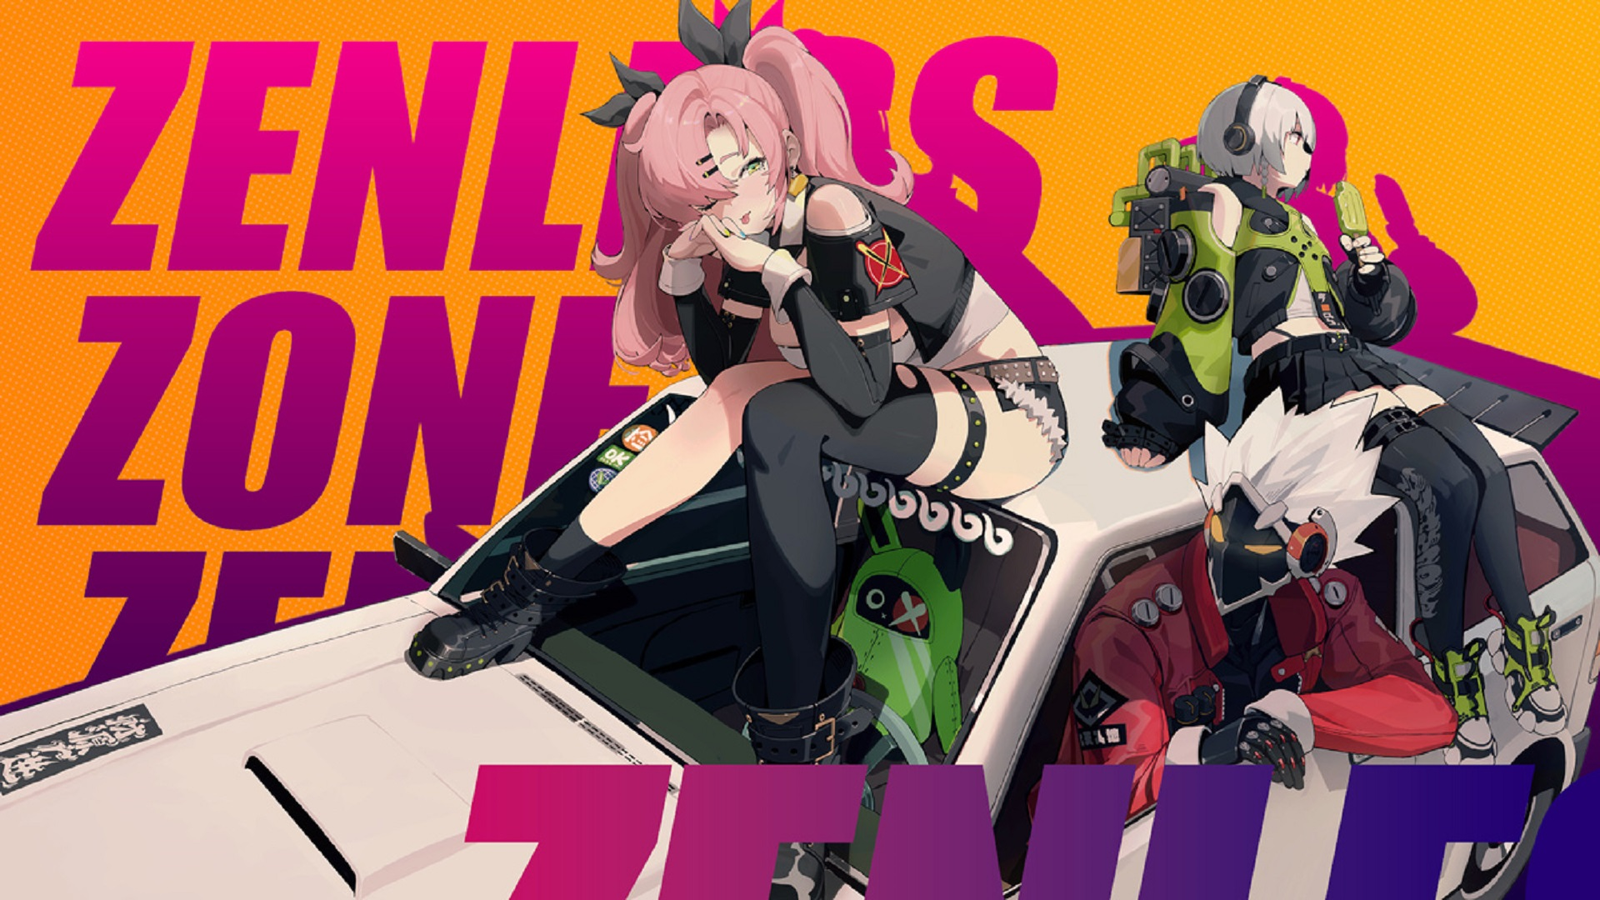 How to sign up for Zenless Zone Zero 2nd closed beta (Equalizing